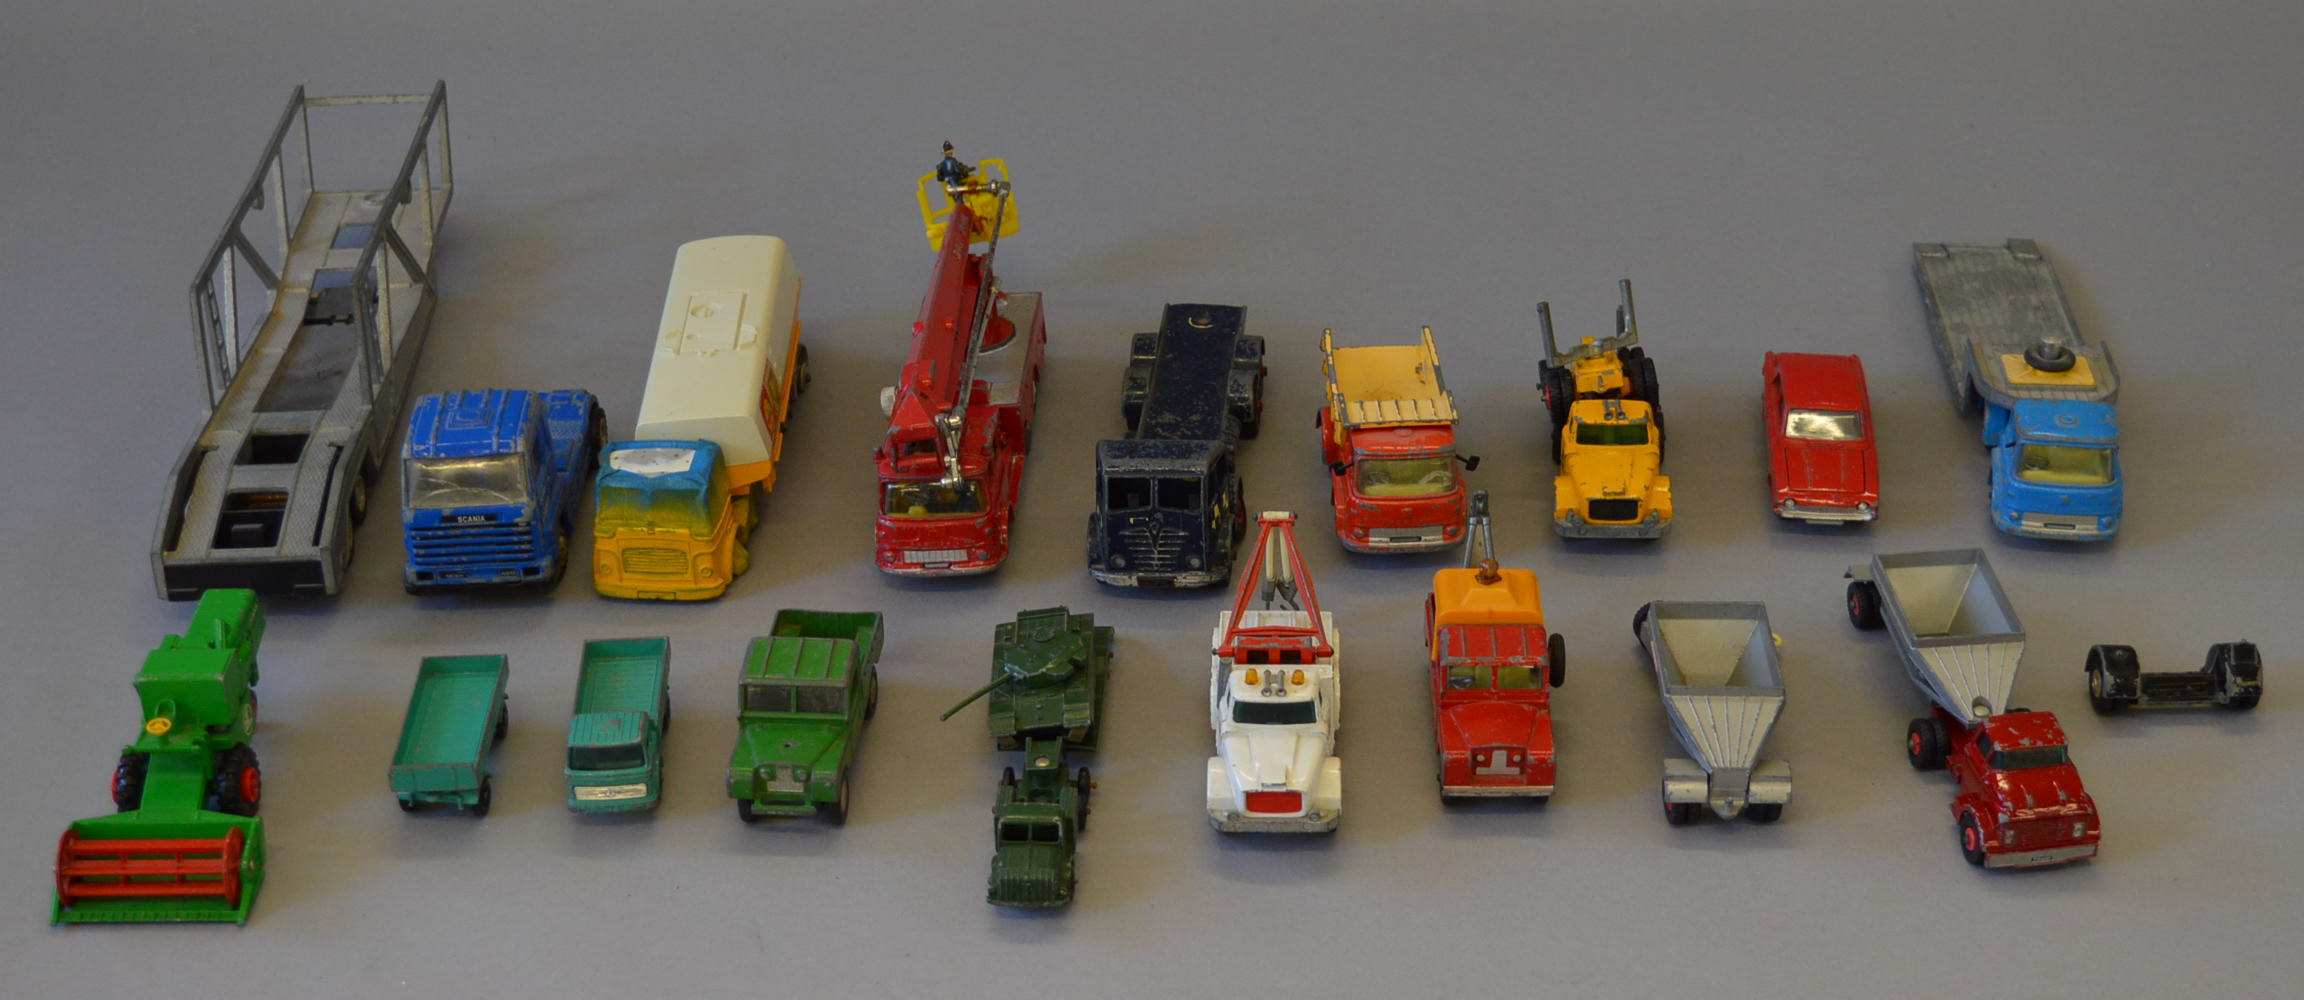 A mixed lot of playworn diecast models by Dinky, Corgi, Matchbox and others, some with repainting,